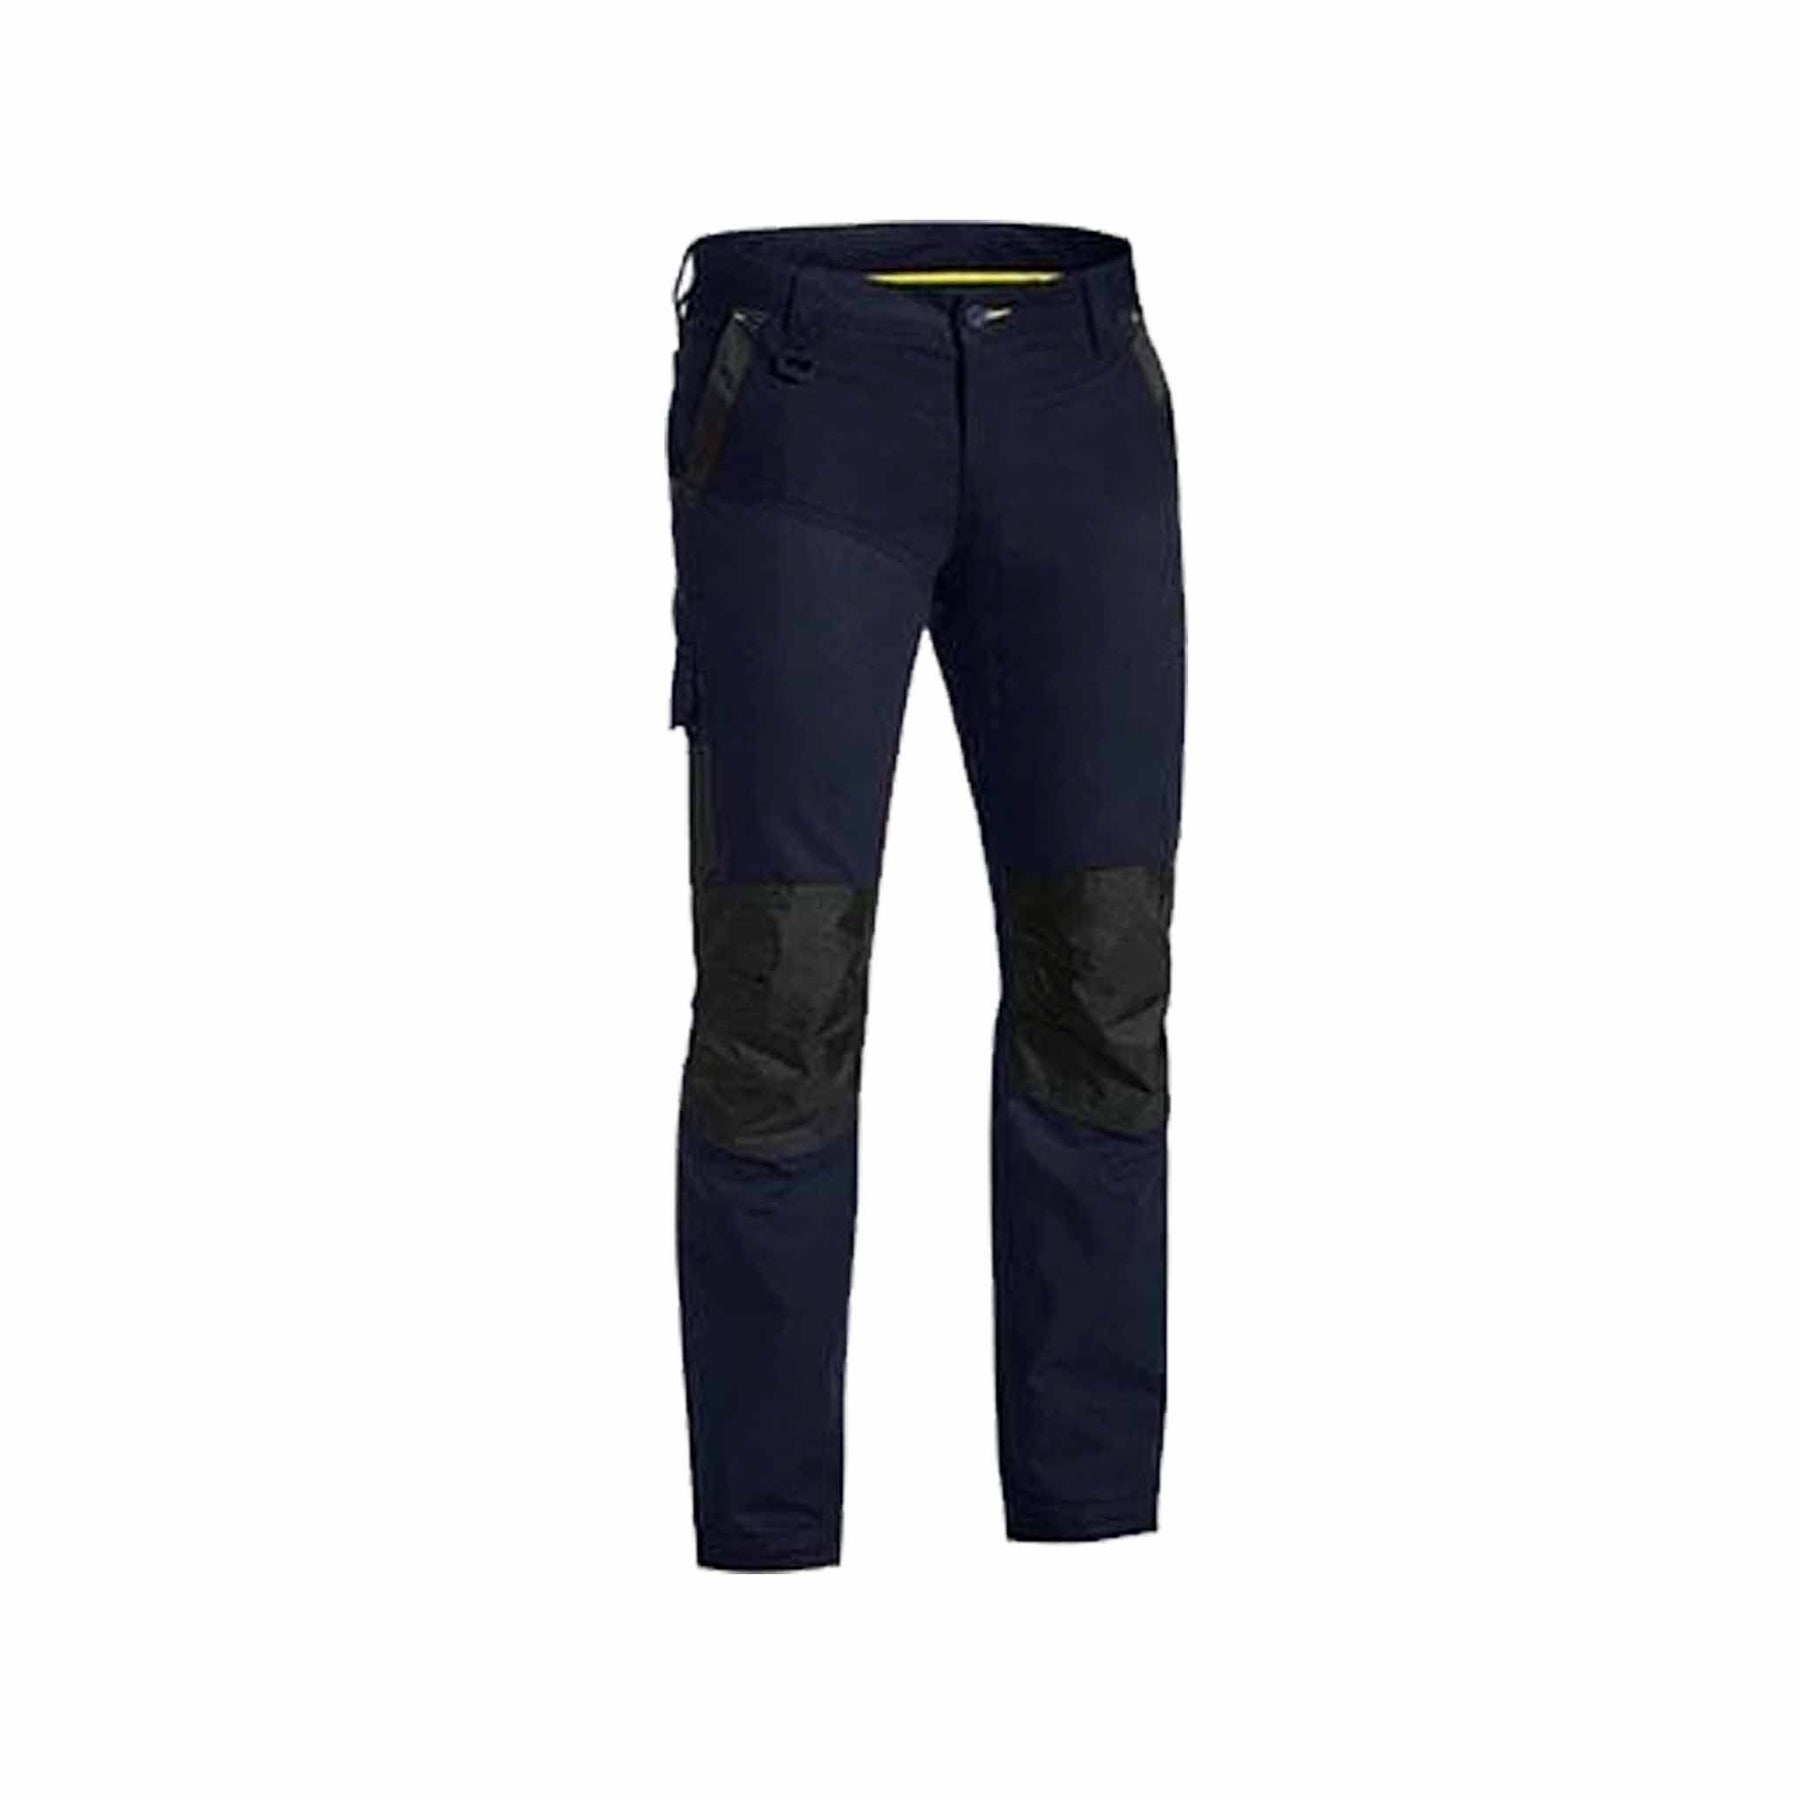 navy flex and move pants